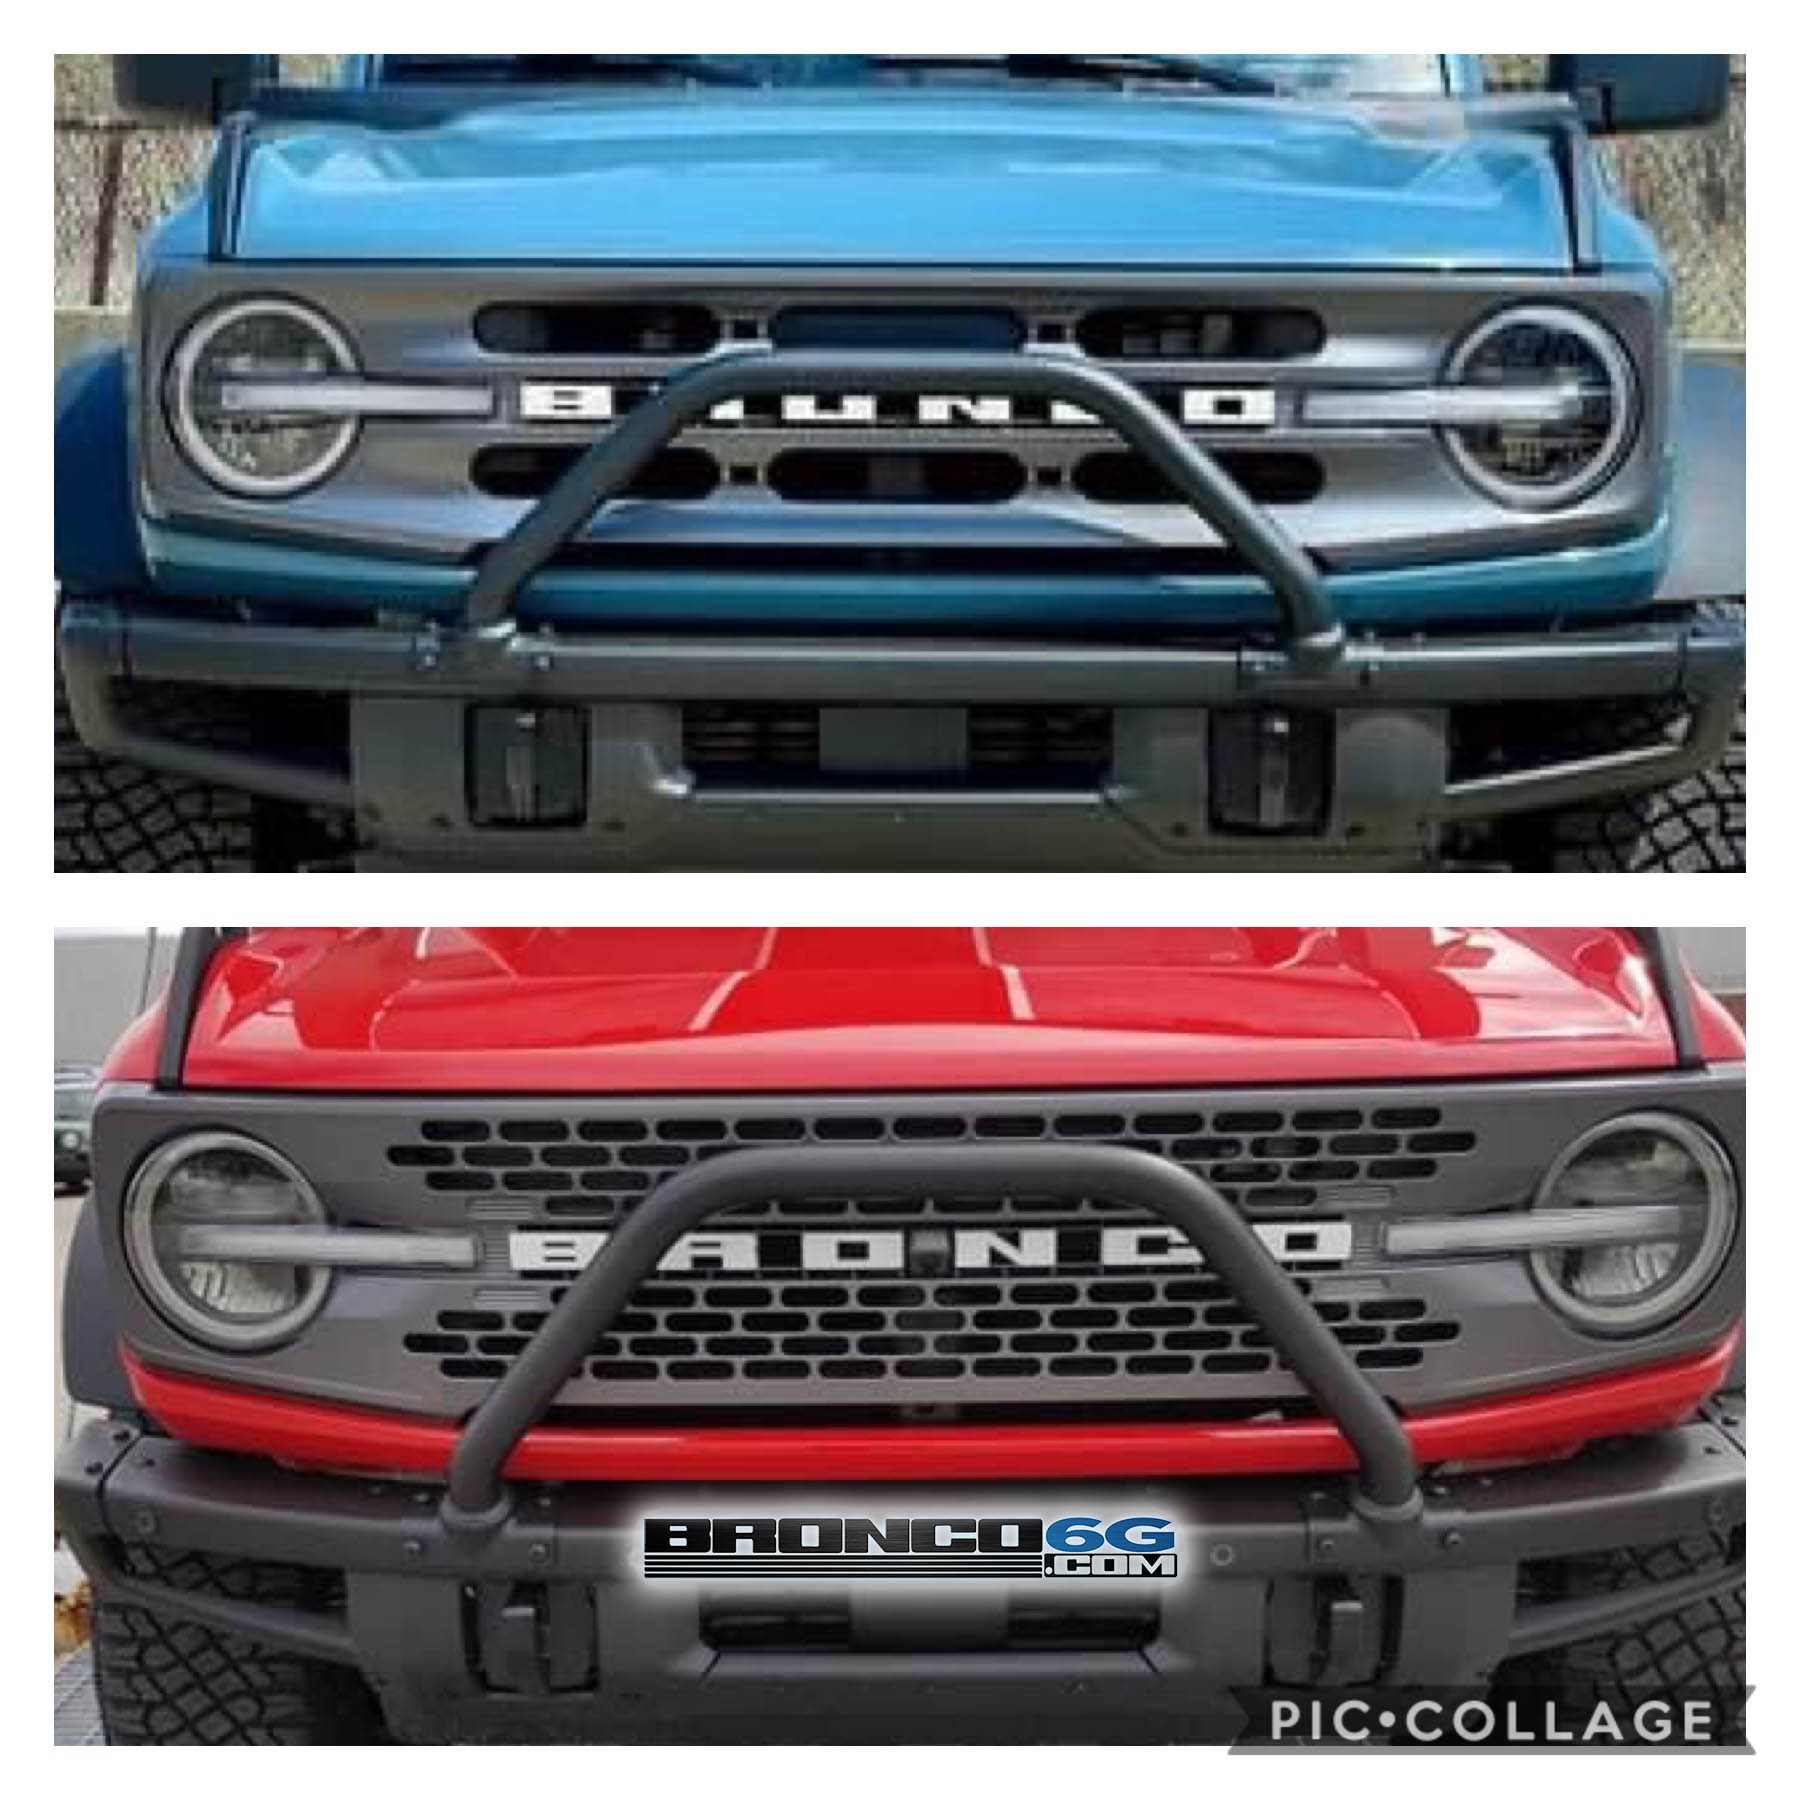 Ford Bronco New Improved Brush Guard / Bull Bar Design and Location on Race Red Bronco Badlands! 1618657882066